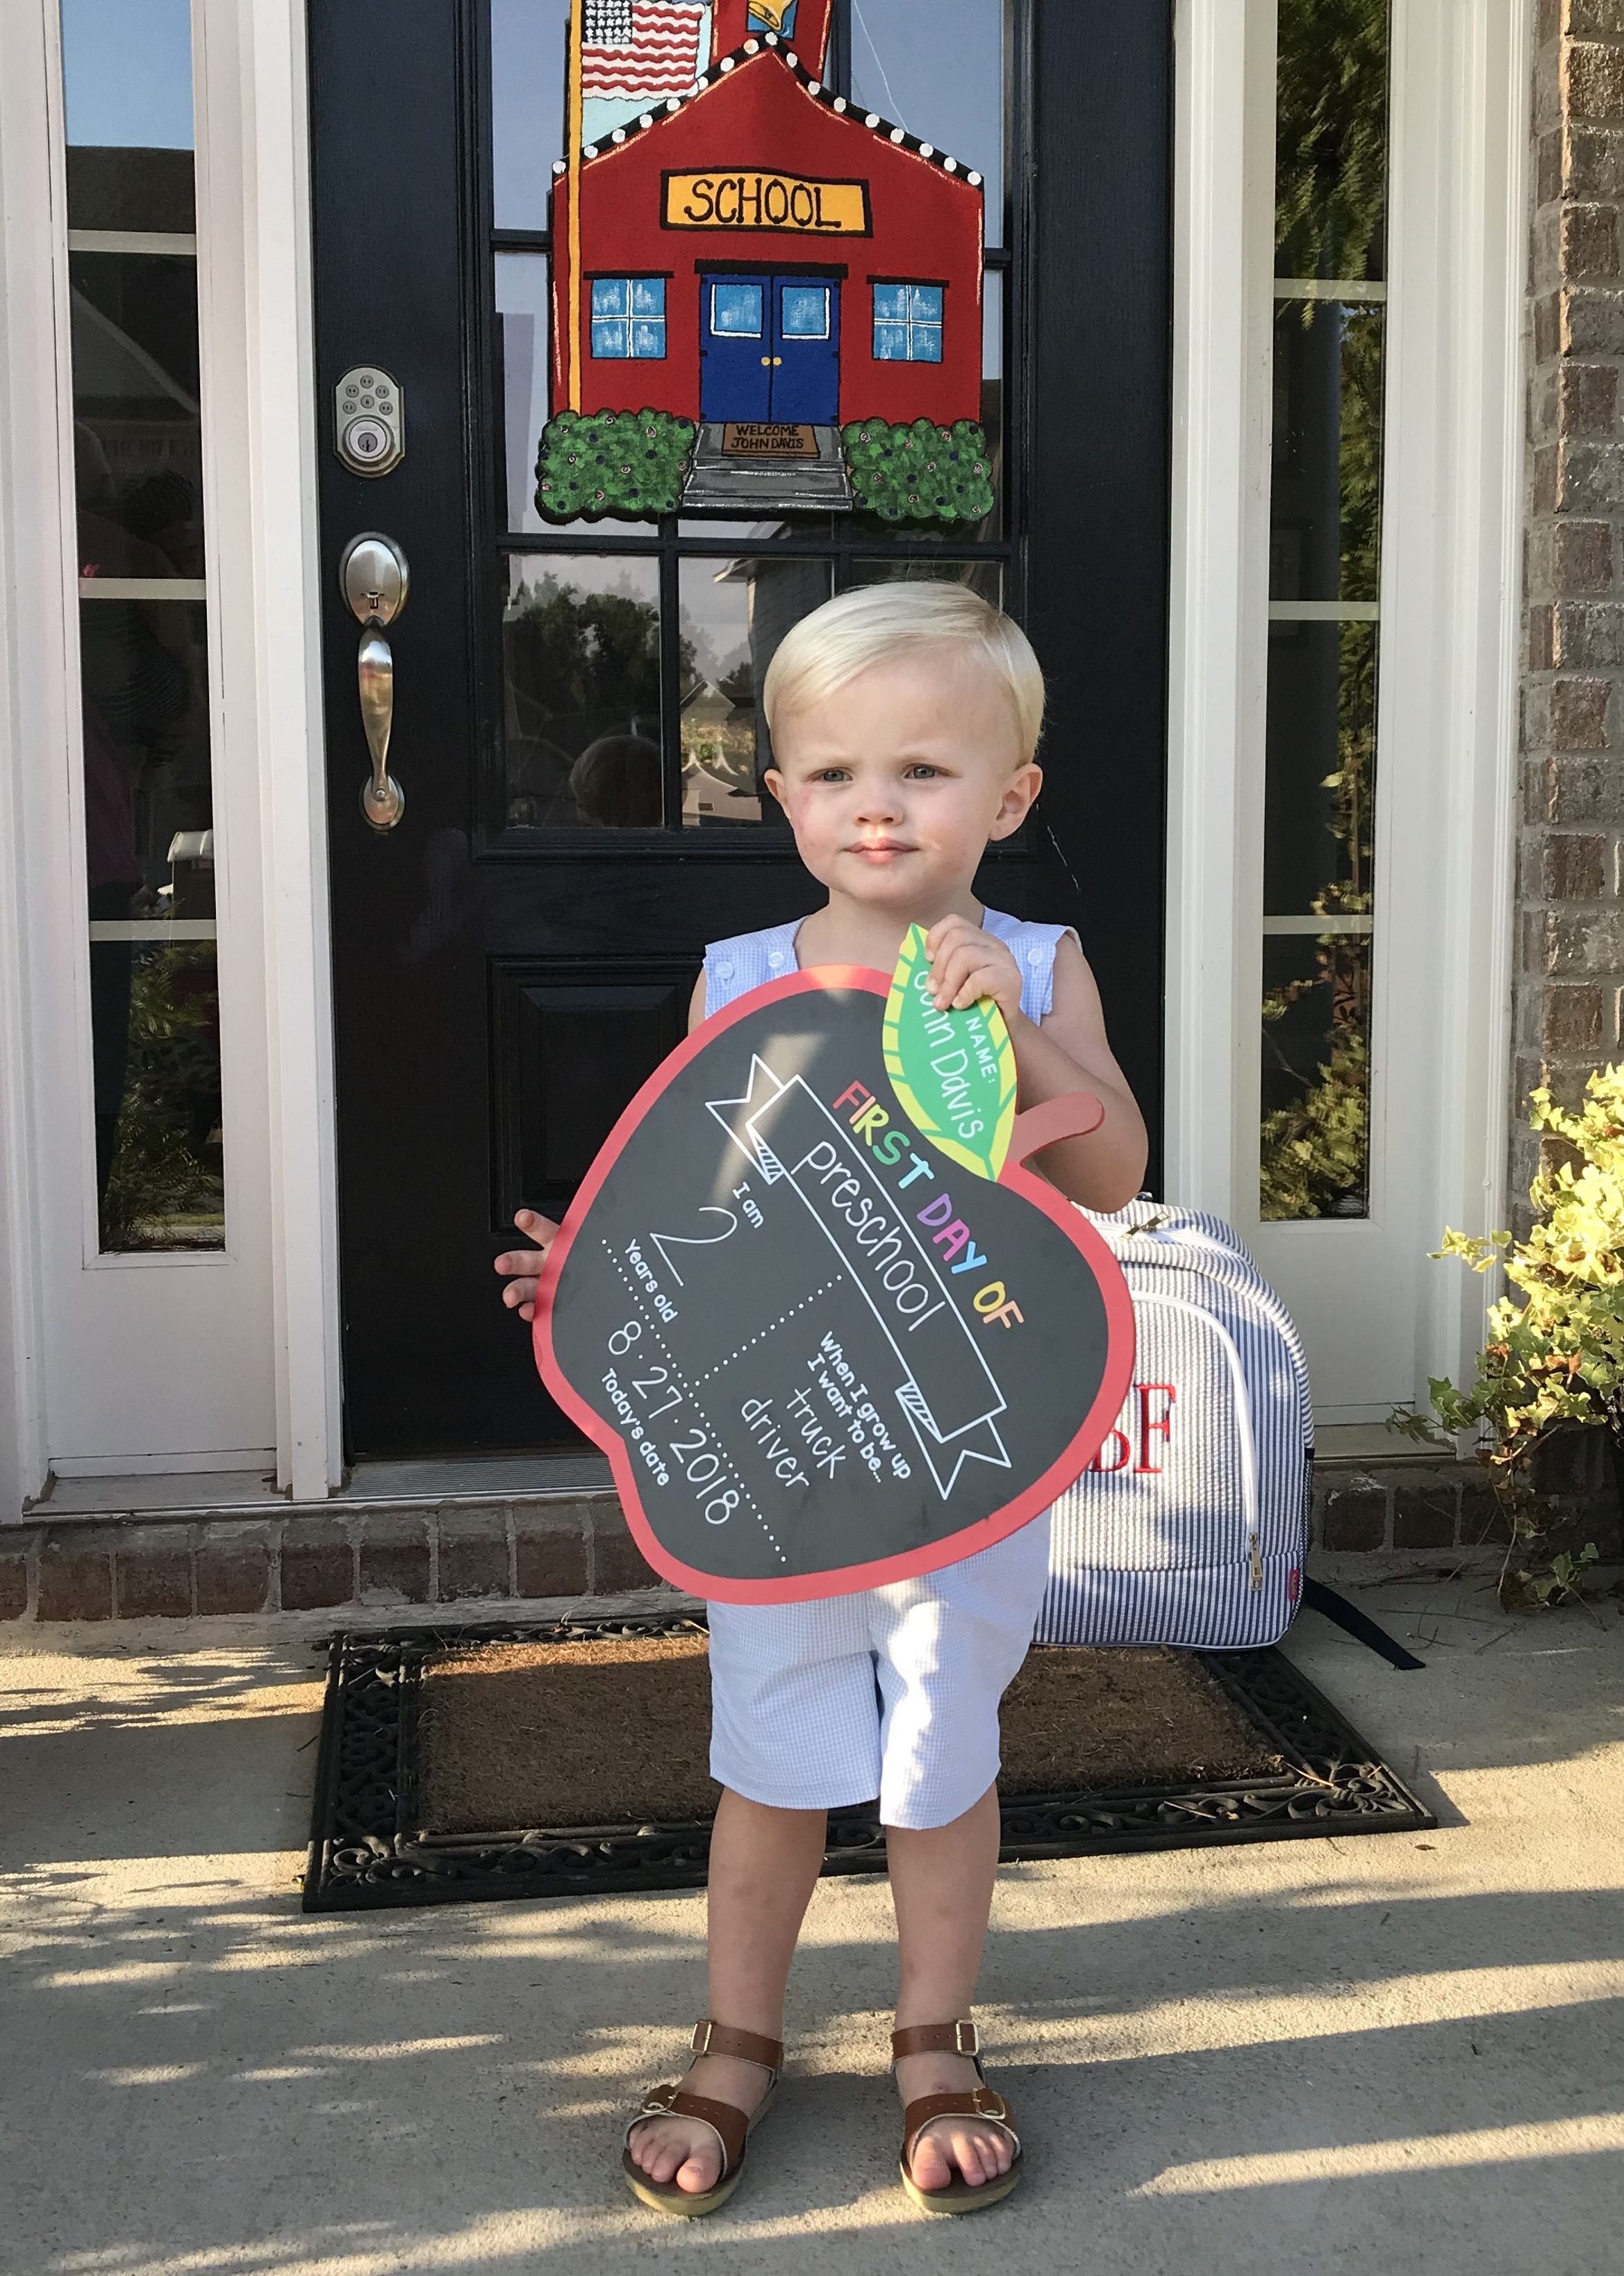 first day of school printable